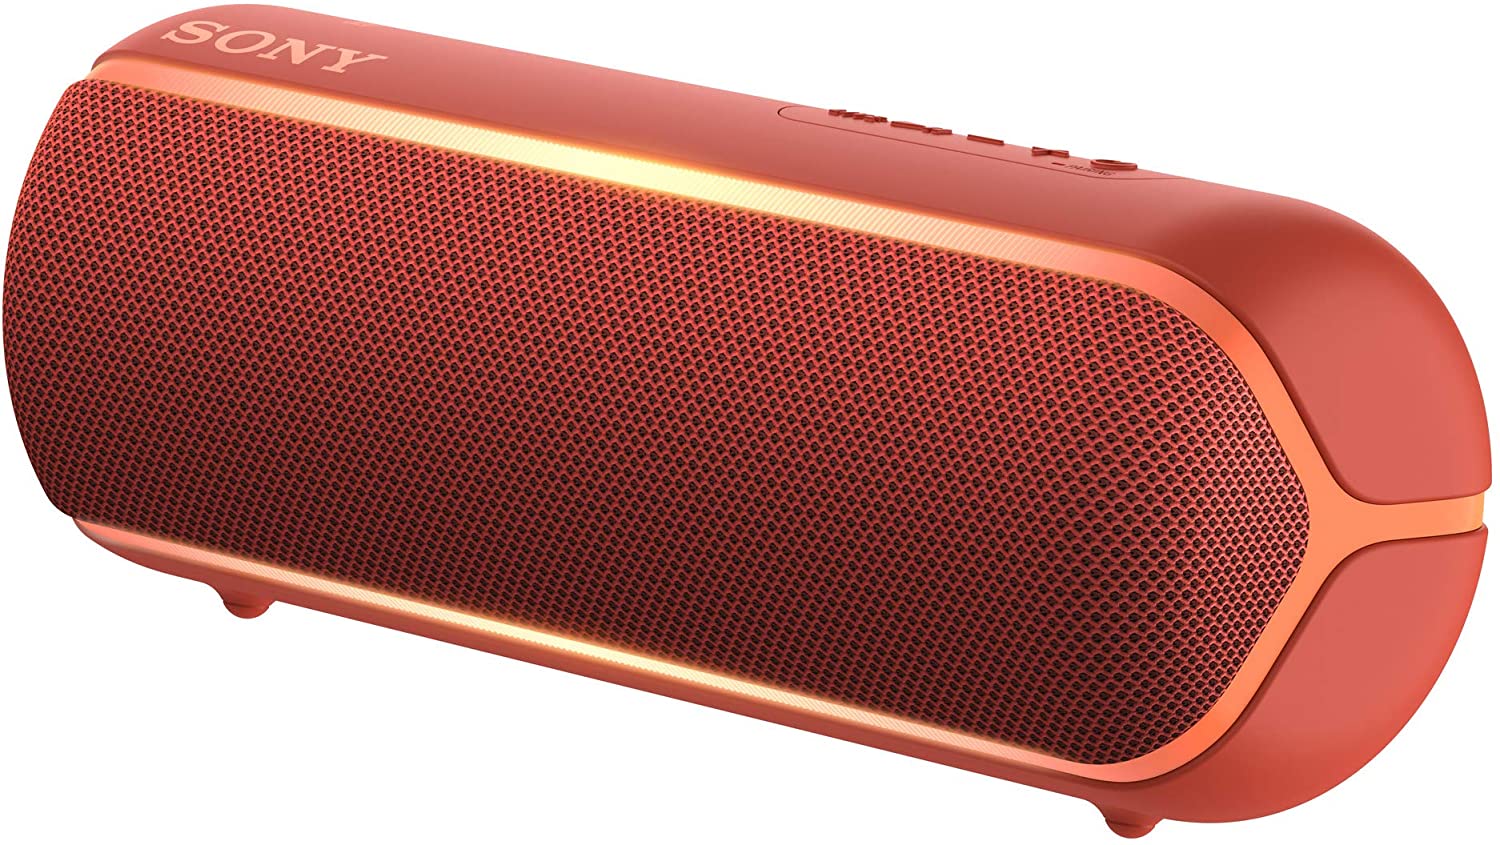 Sony SRS-XB22 Wireless Extra Bass Bluetooth Speaker with 12 Hours Battery Life (Red)